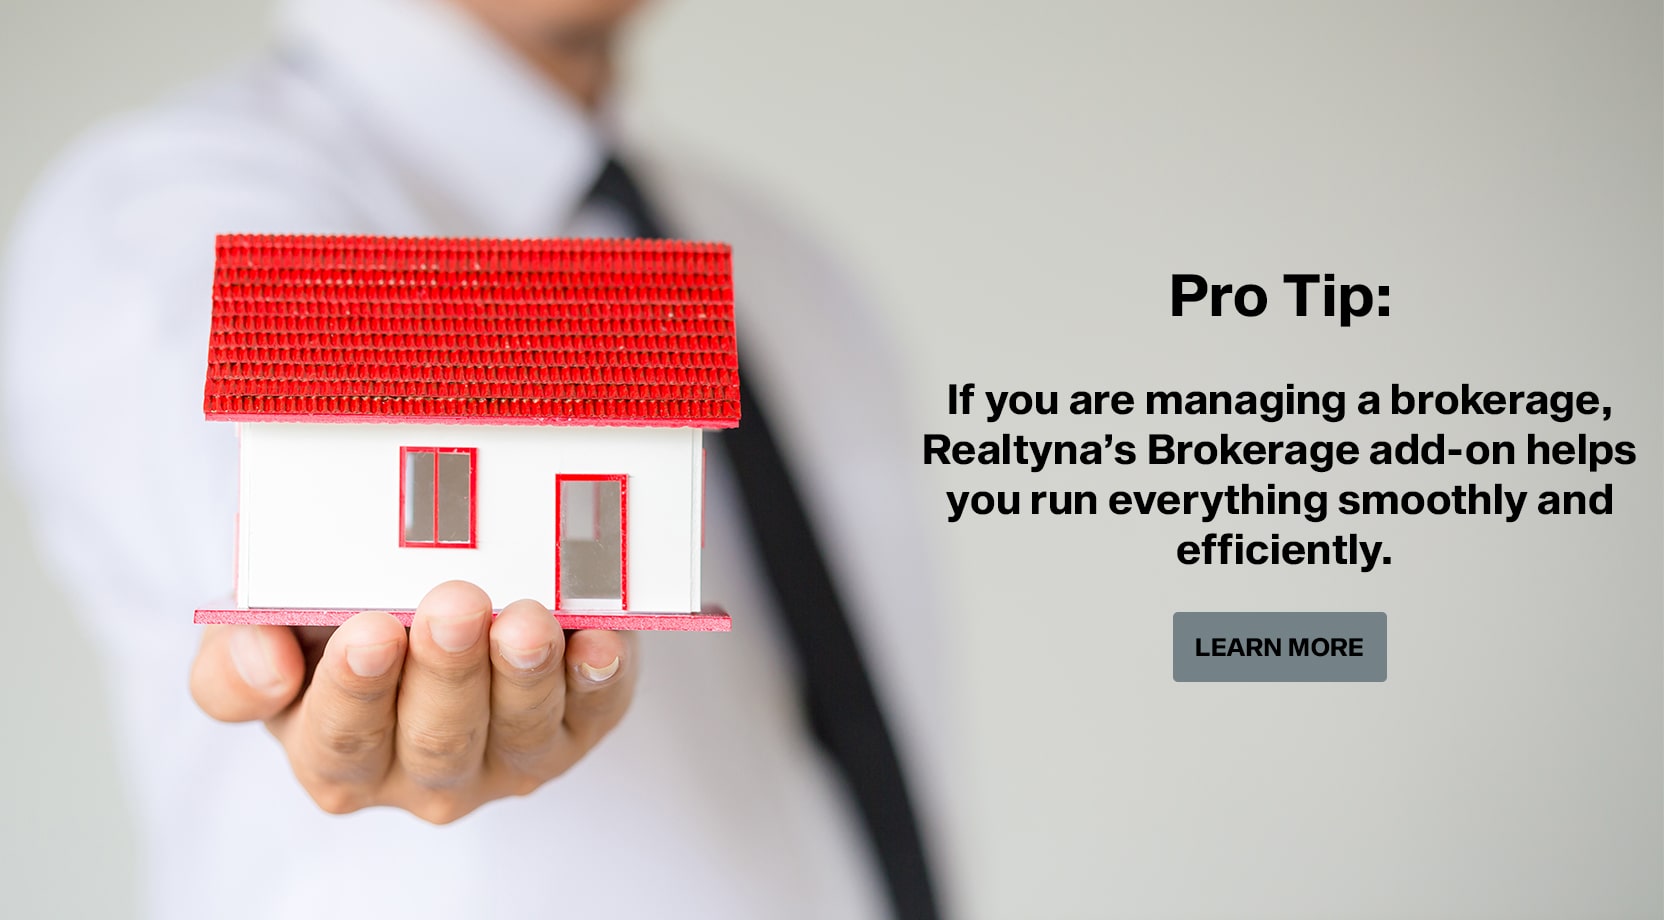 Realtyna's Brokerage Add-on